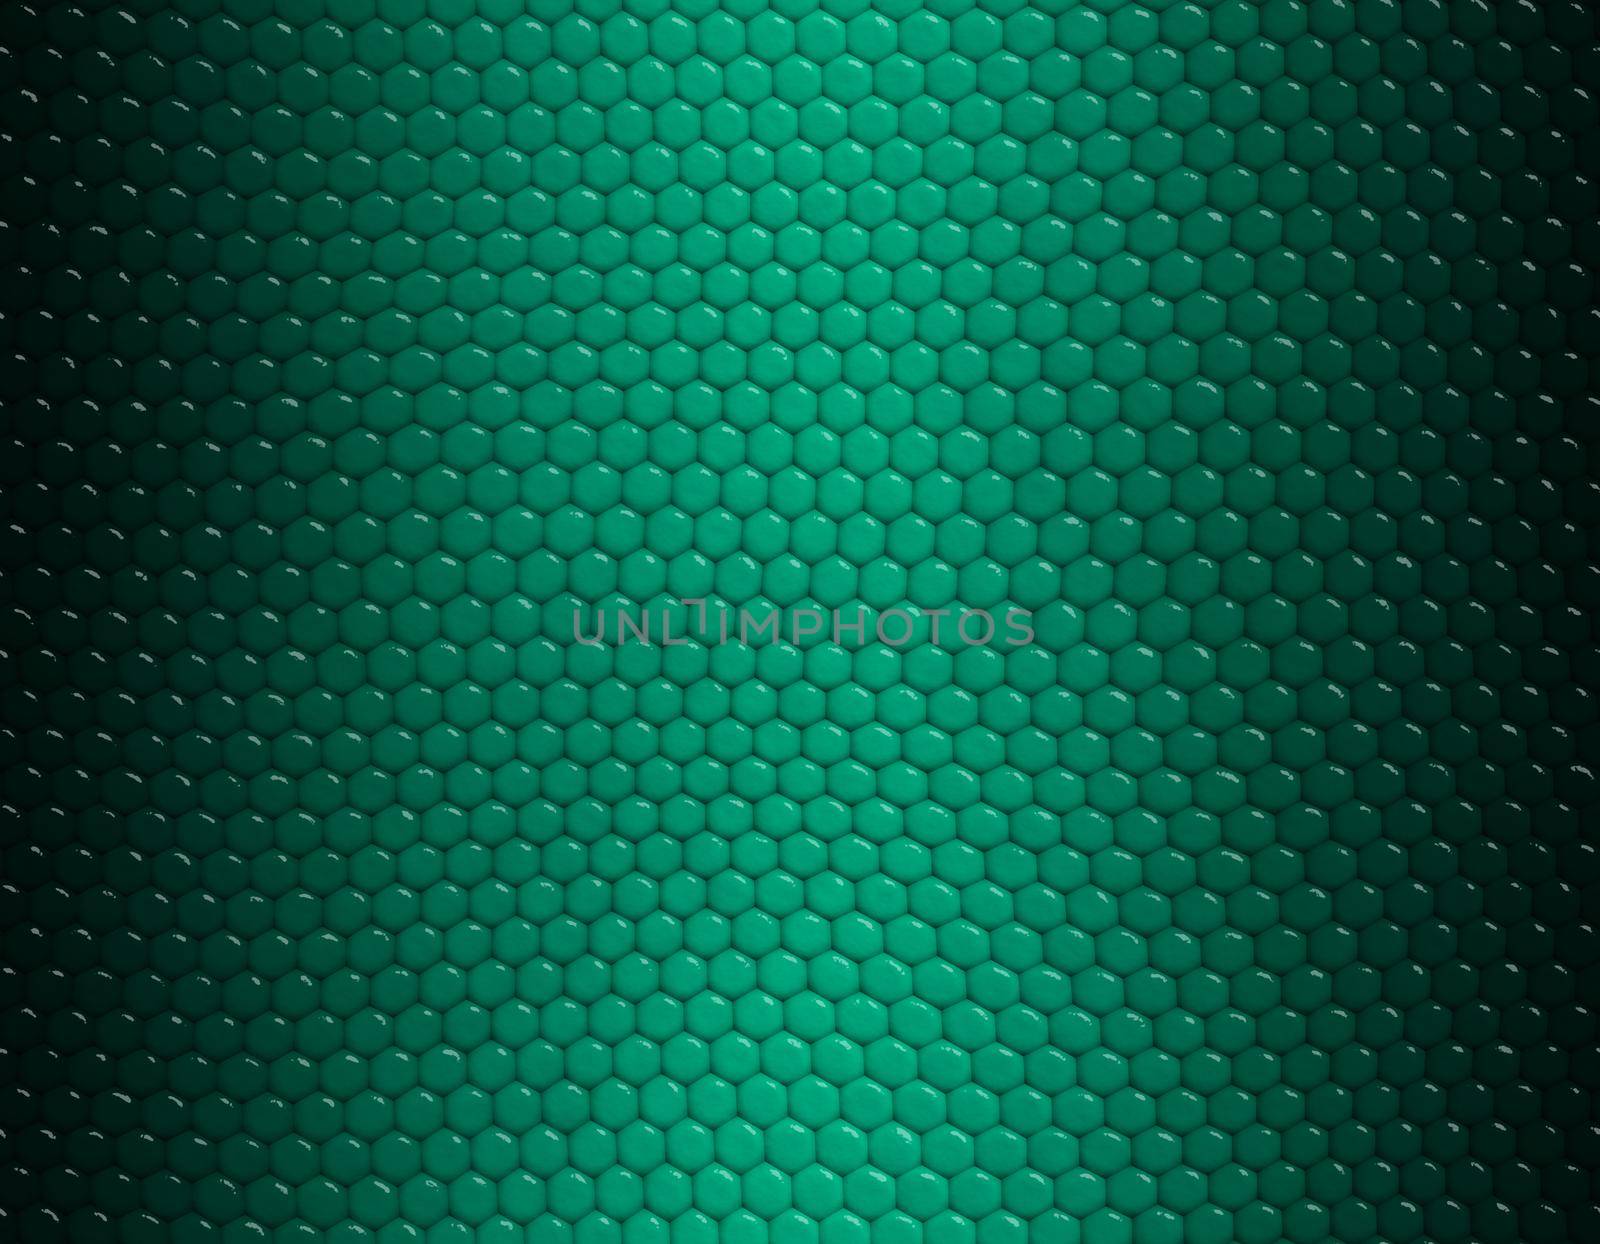 Emerald and green gradient snake skin seamless pattern, hexagonal scale